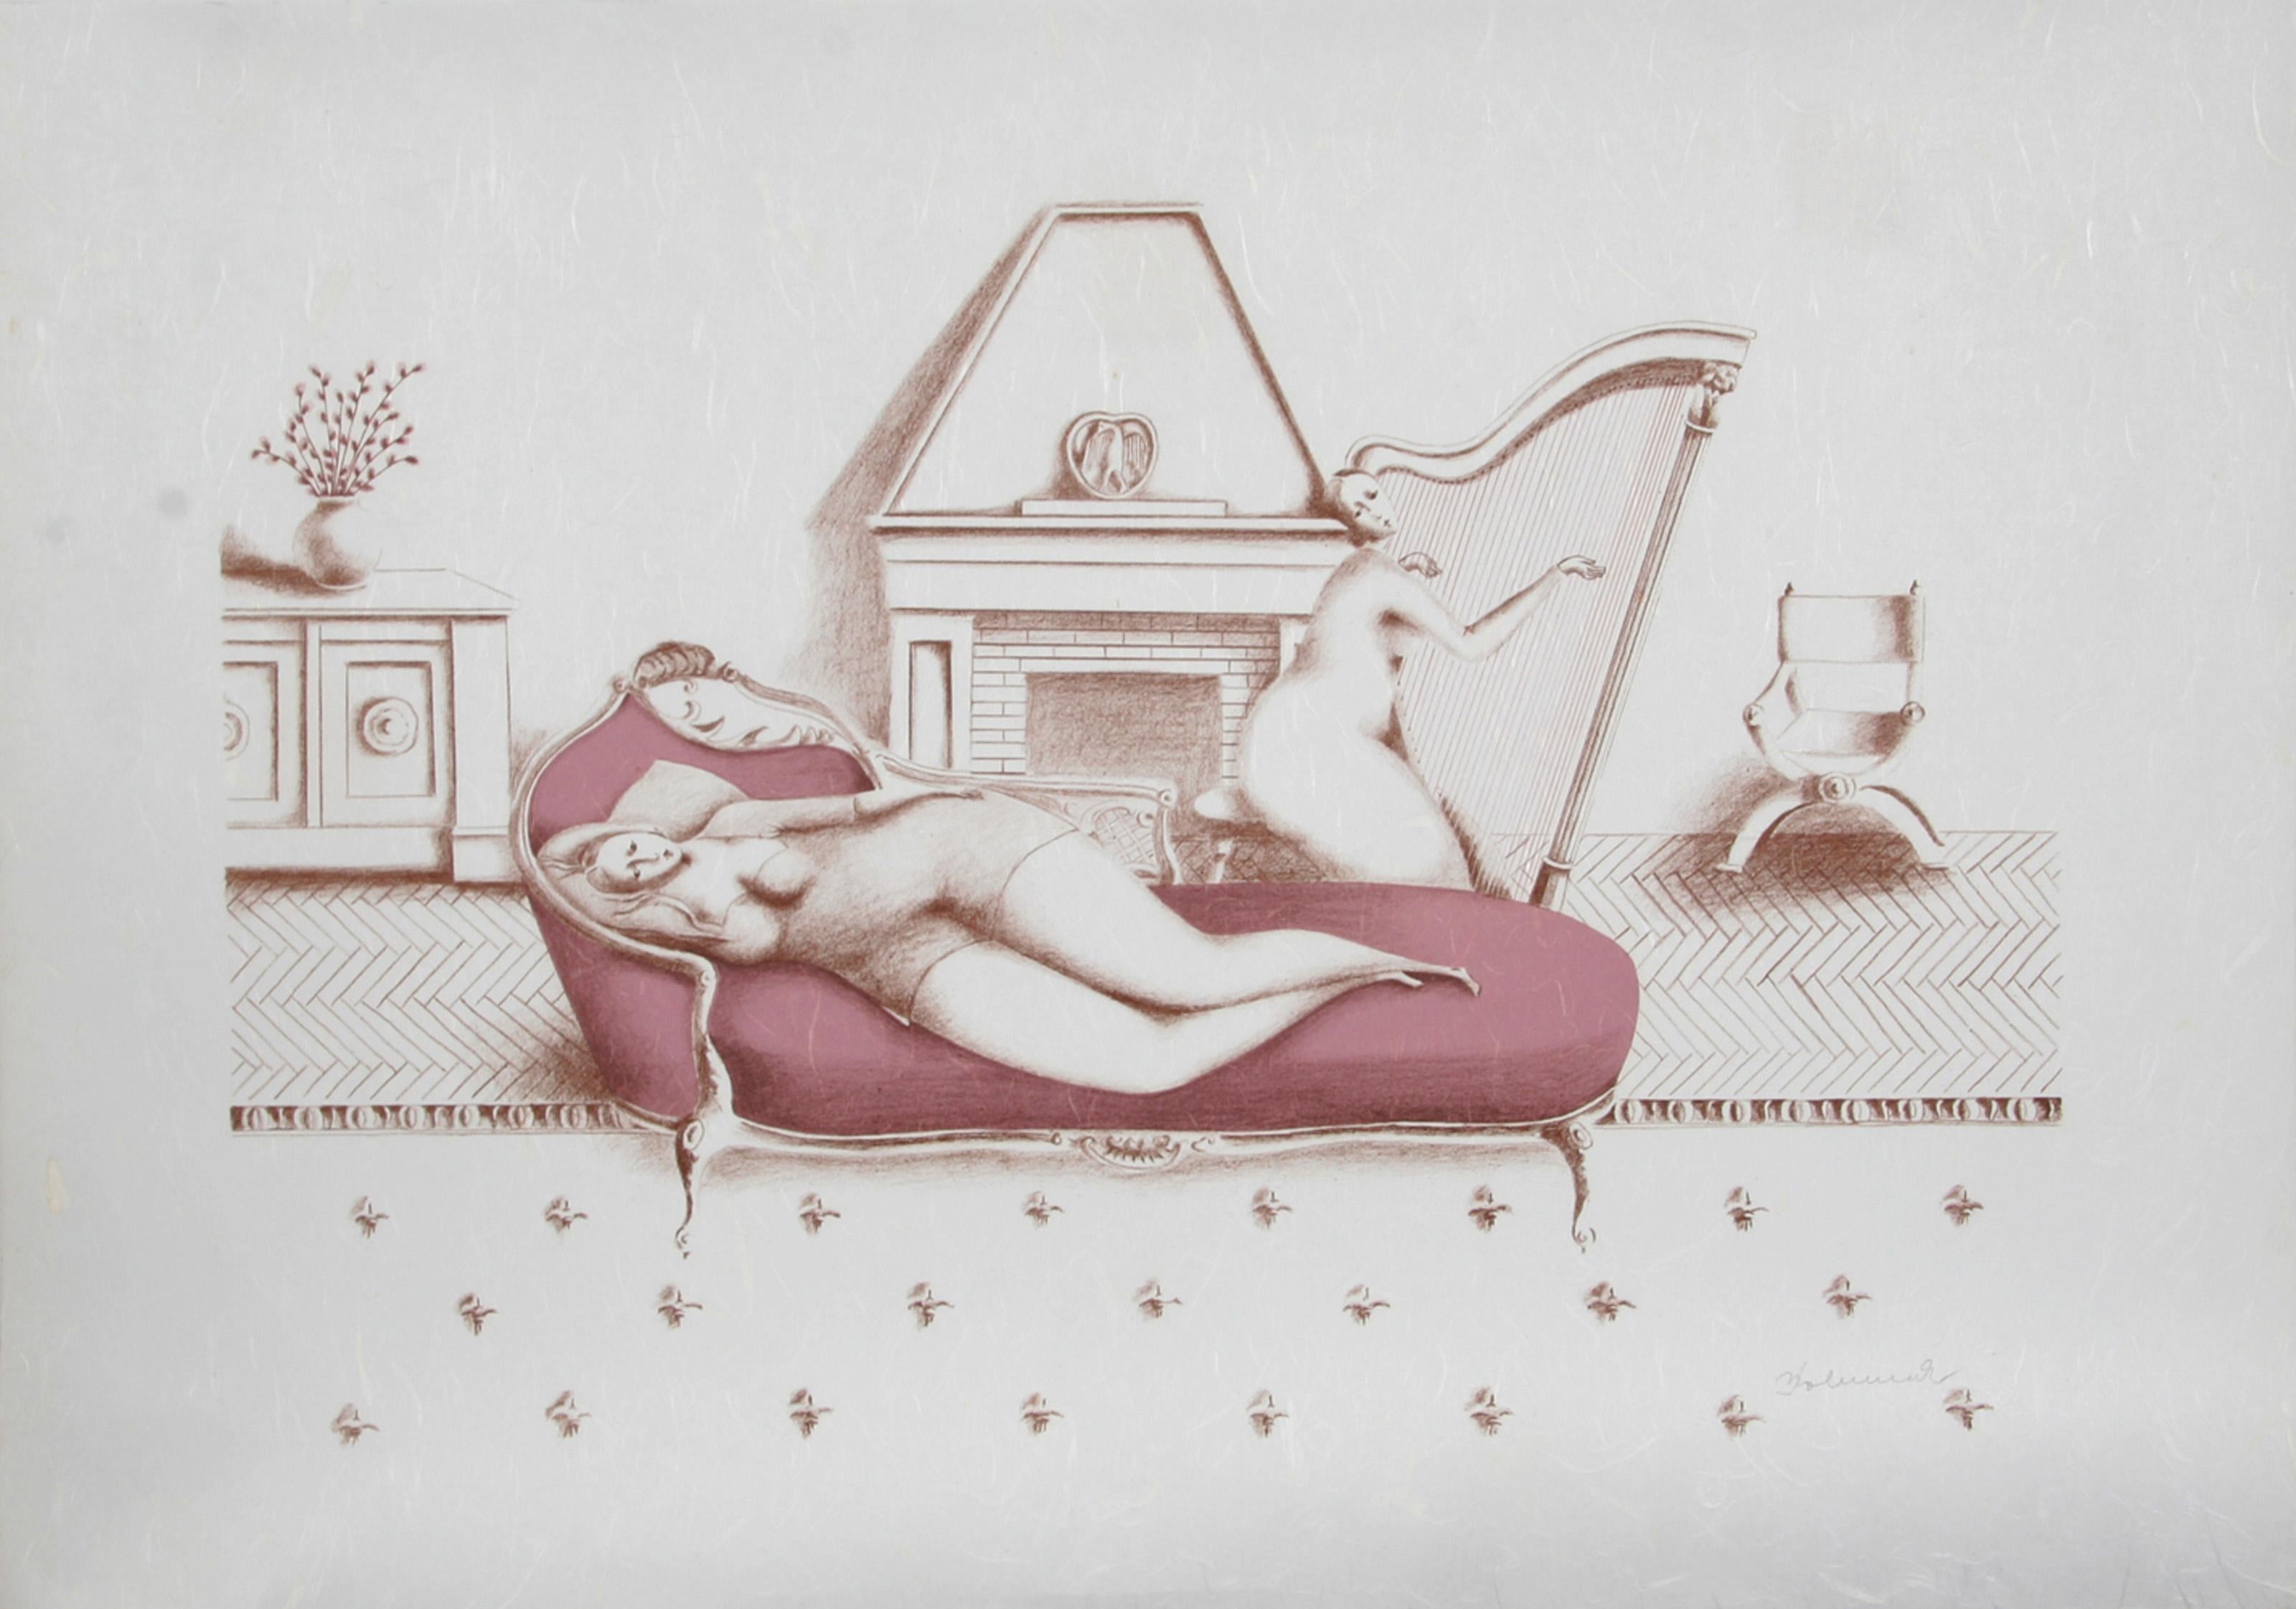 Branko Bahunek, Croatian (1935 - ) -  Lounging with Harp (Rose). Medium: Lithograph on Japon, Signed and numbered in pencil, Edition: 50, Size: 24.5 in. x 37 in. (62.23 cm x 93.98 cm) 